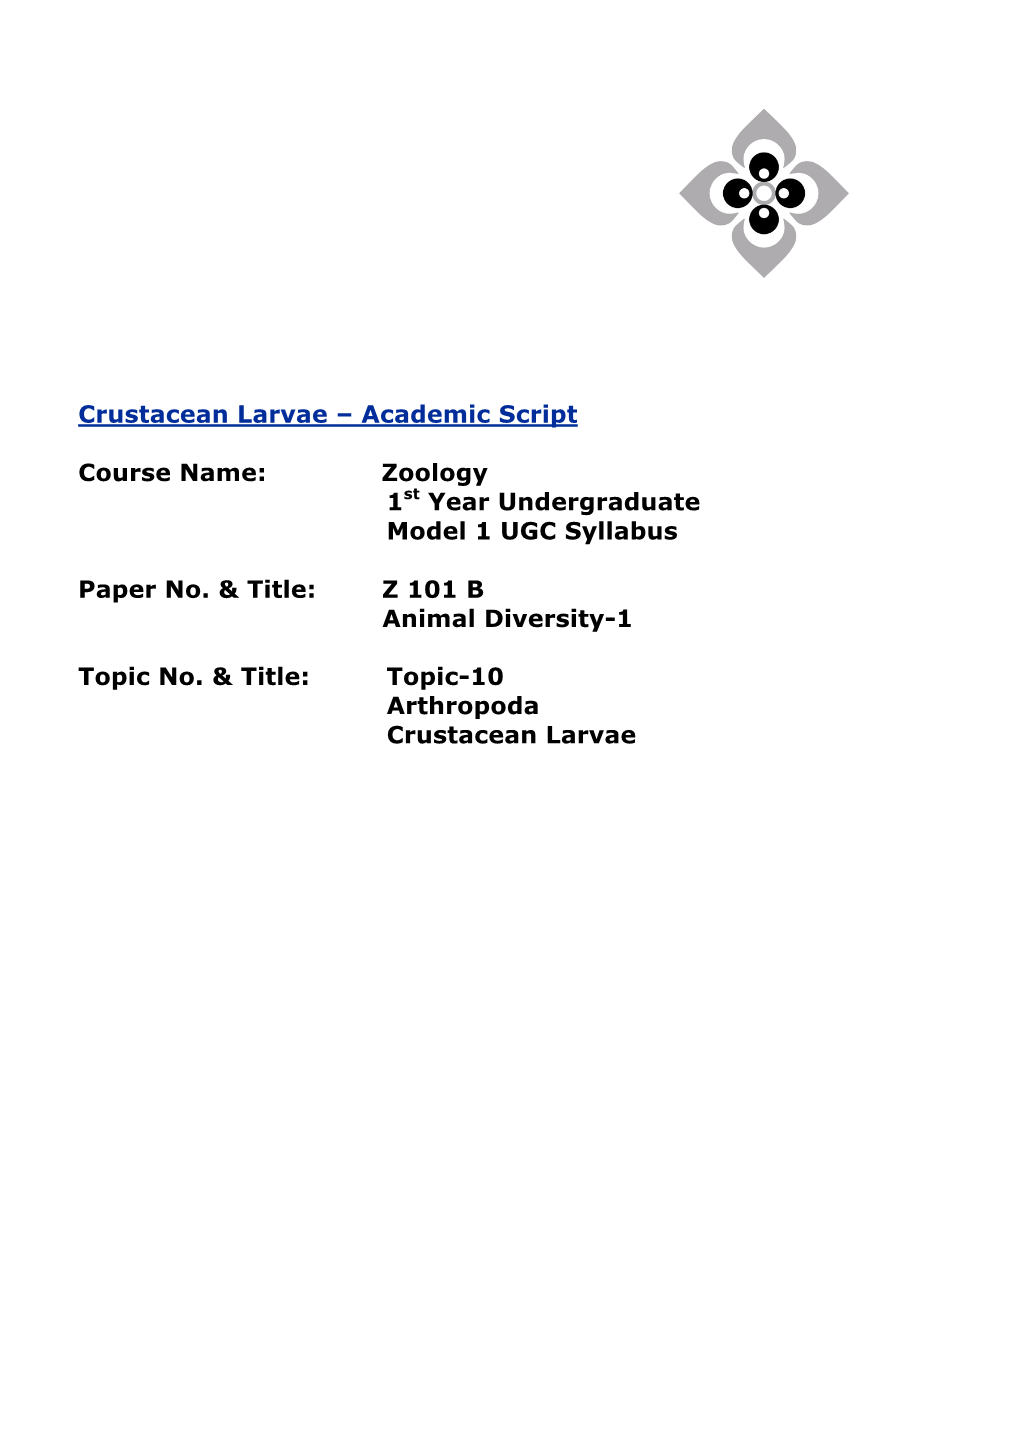 Crustacean Larvae – Academic Script Course Name: Zoology 1St Year